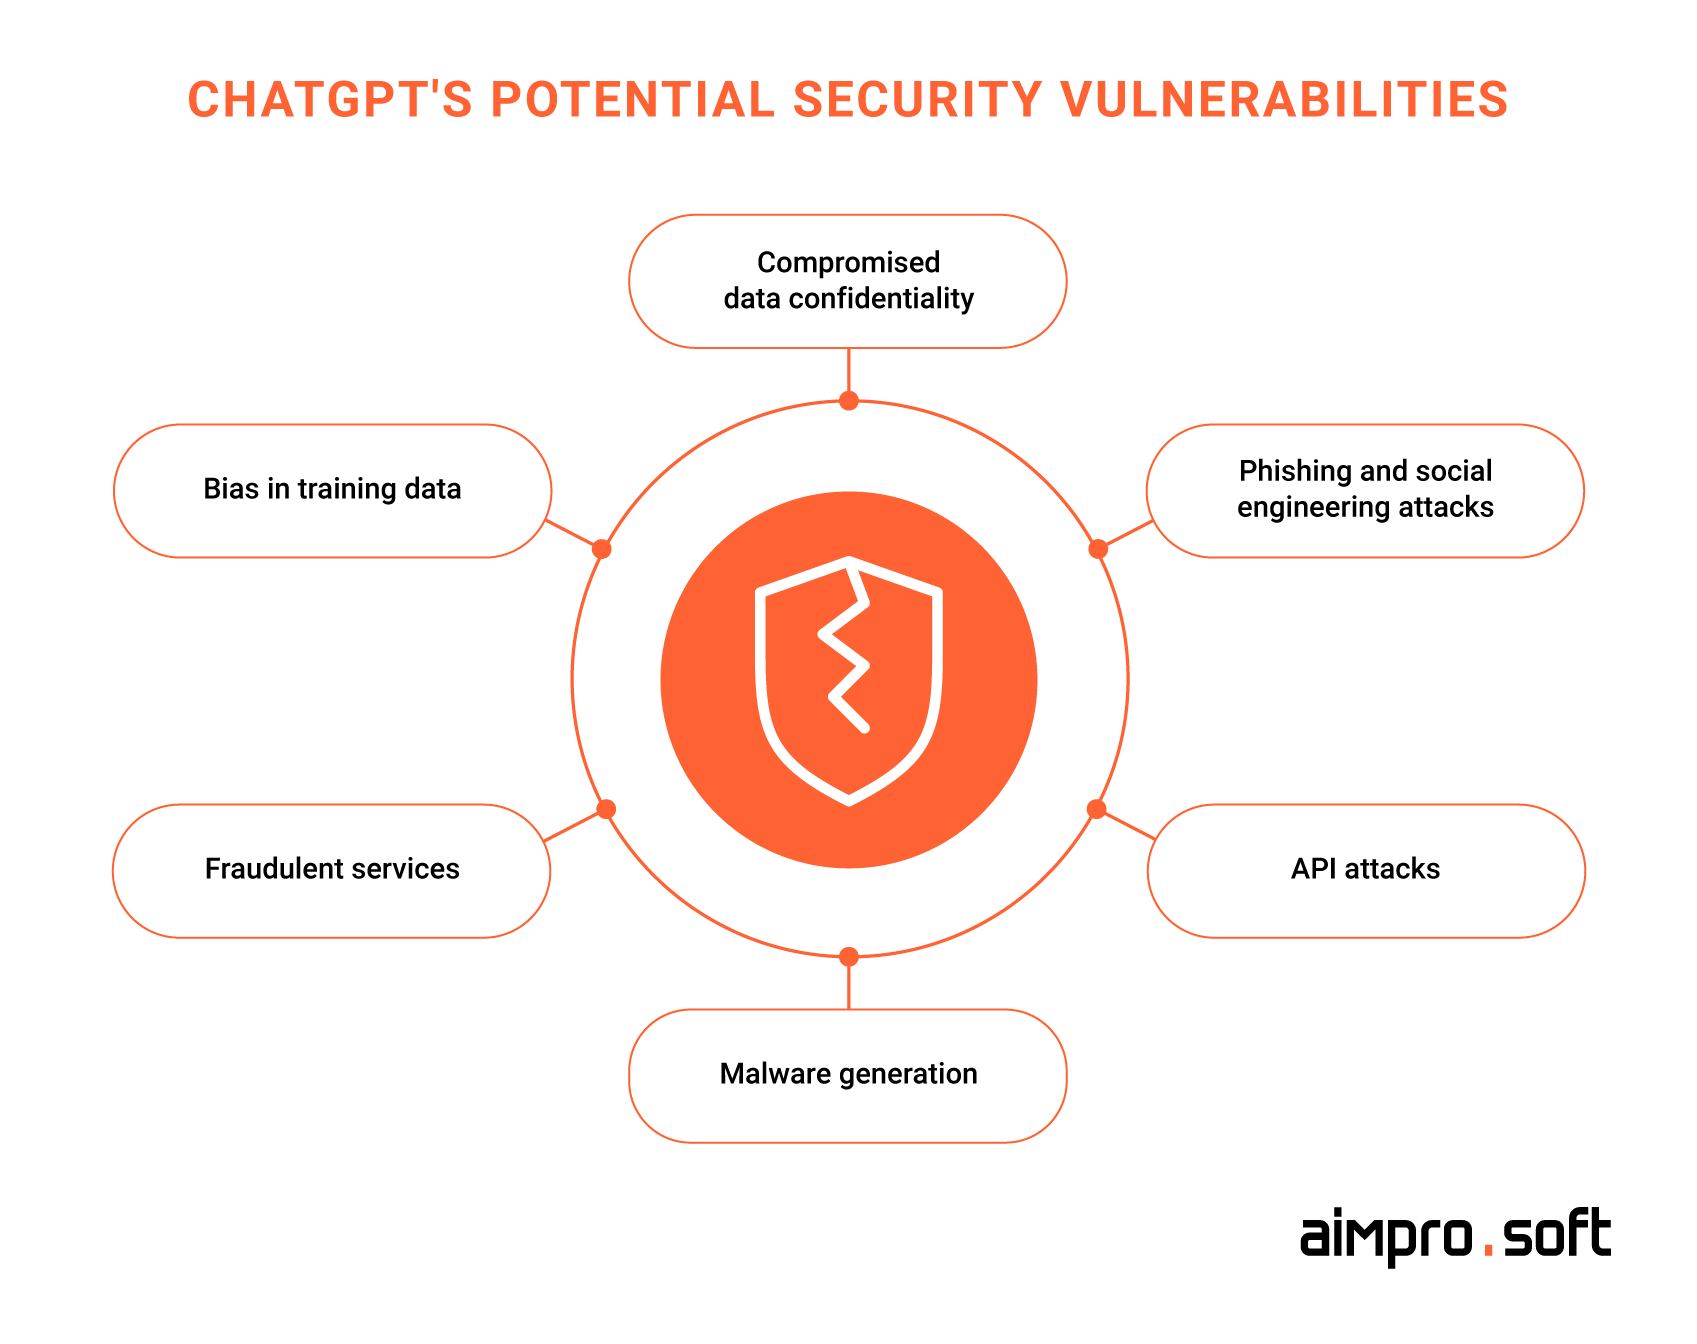 Security risks associated with ChatGPT